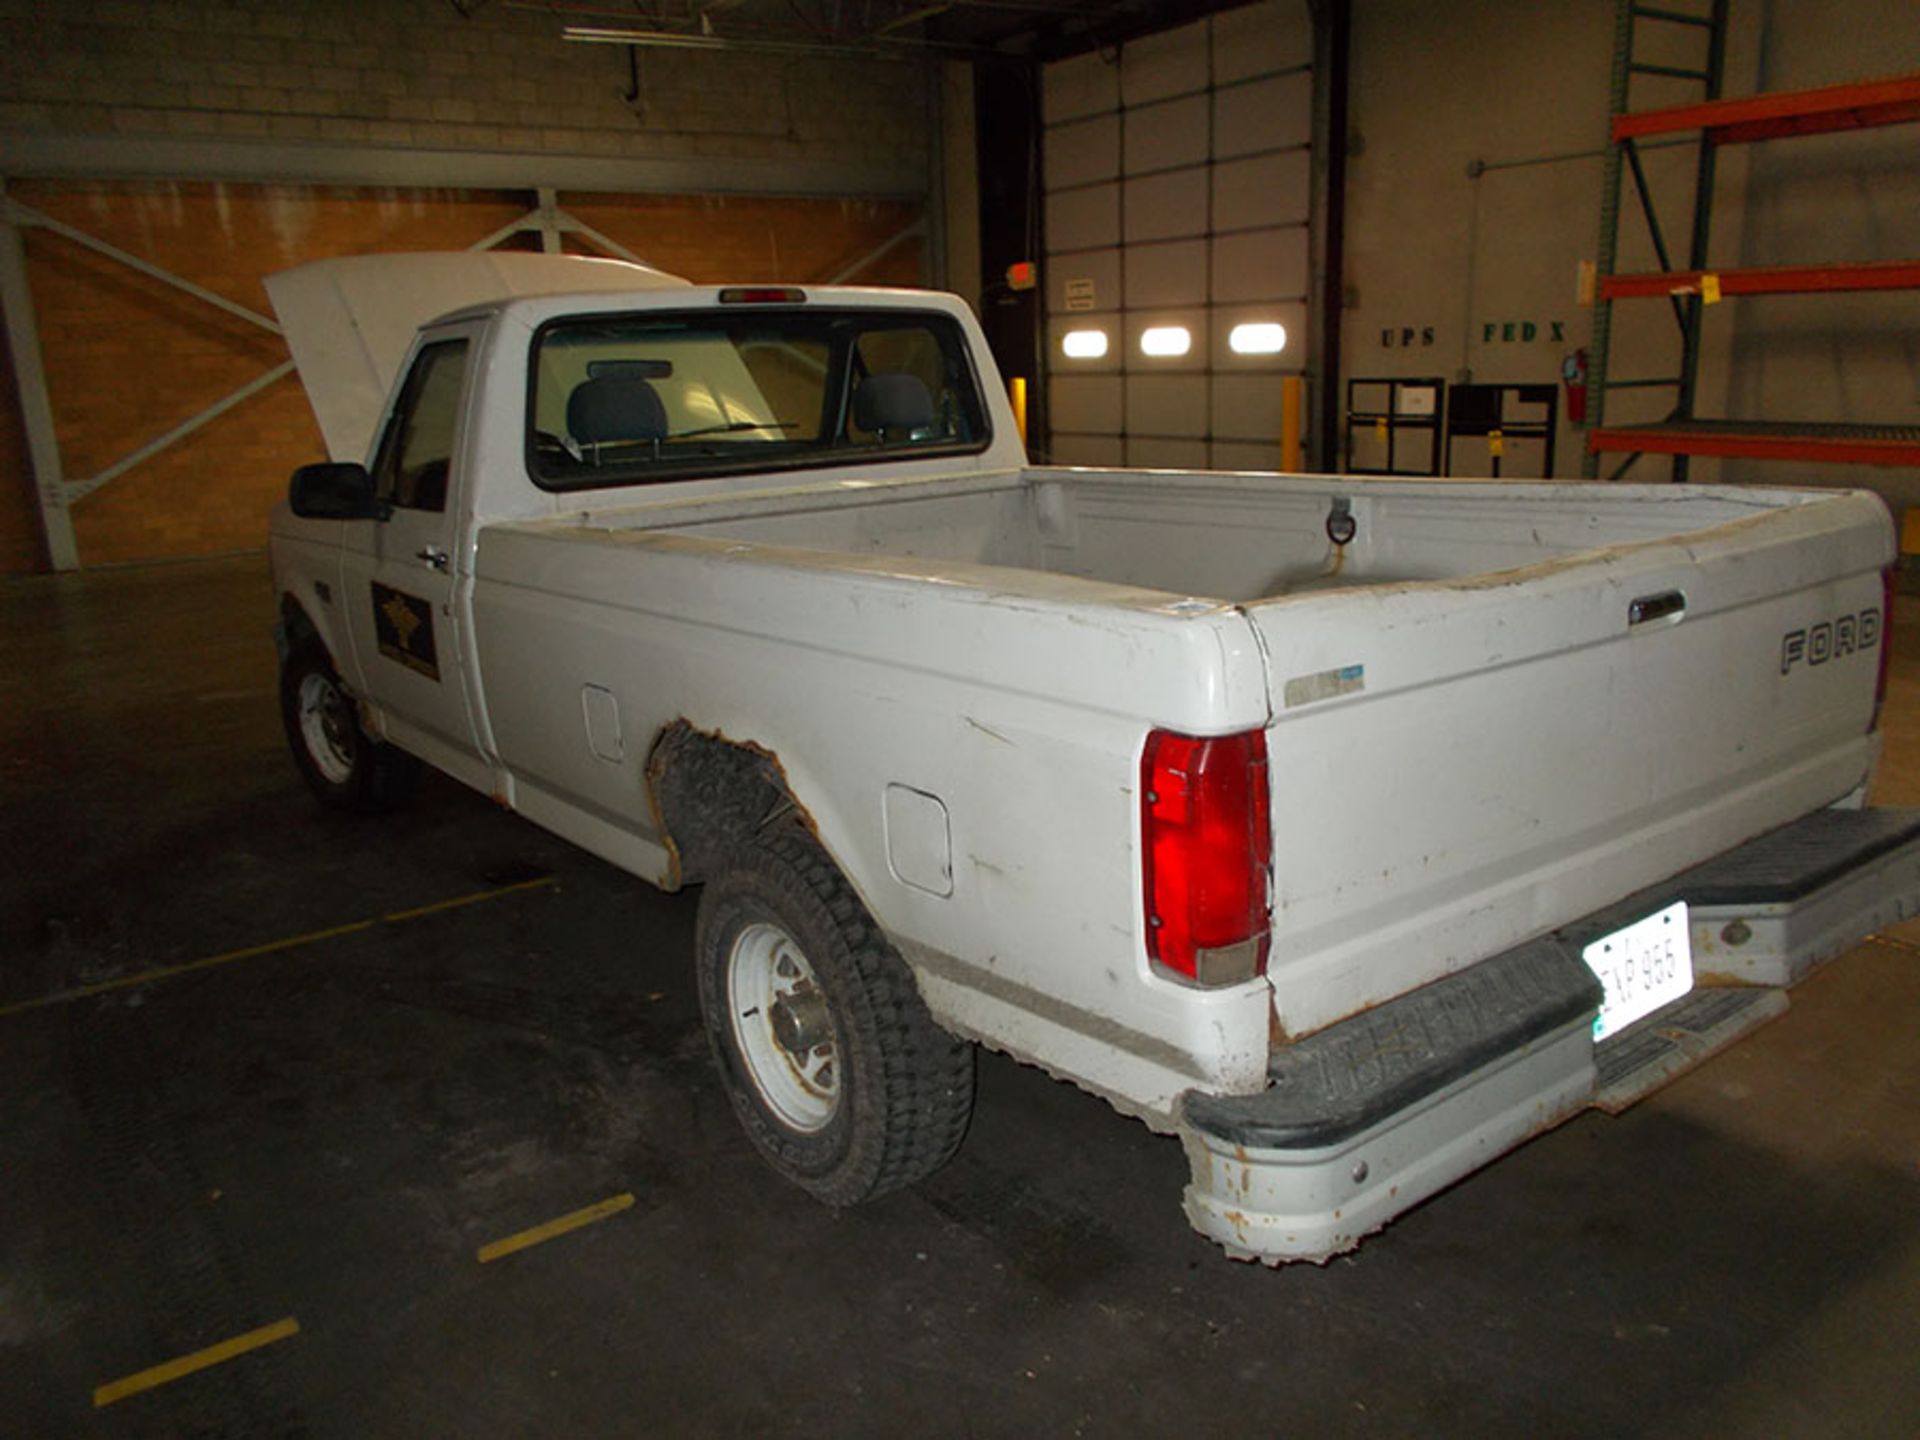 1995 FORD F150 XL STANDARD CAB 2-WHEEL DRIVE TRUCK; 199,824 MILES, VIN 1FTDF15Y45LB06506, 4.9 LITER, - Image 4 of 5